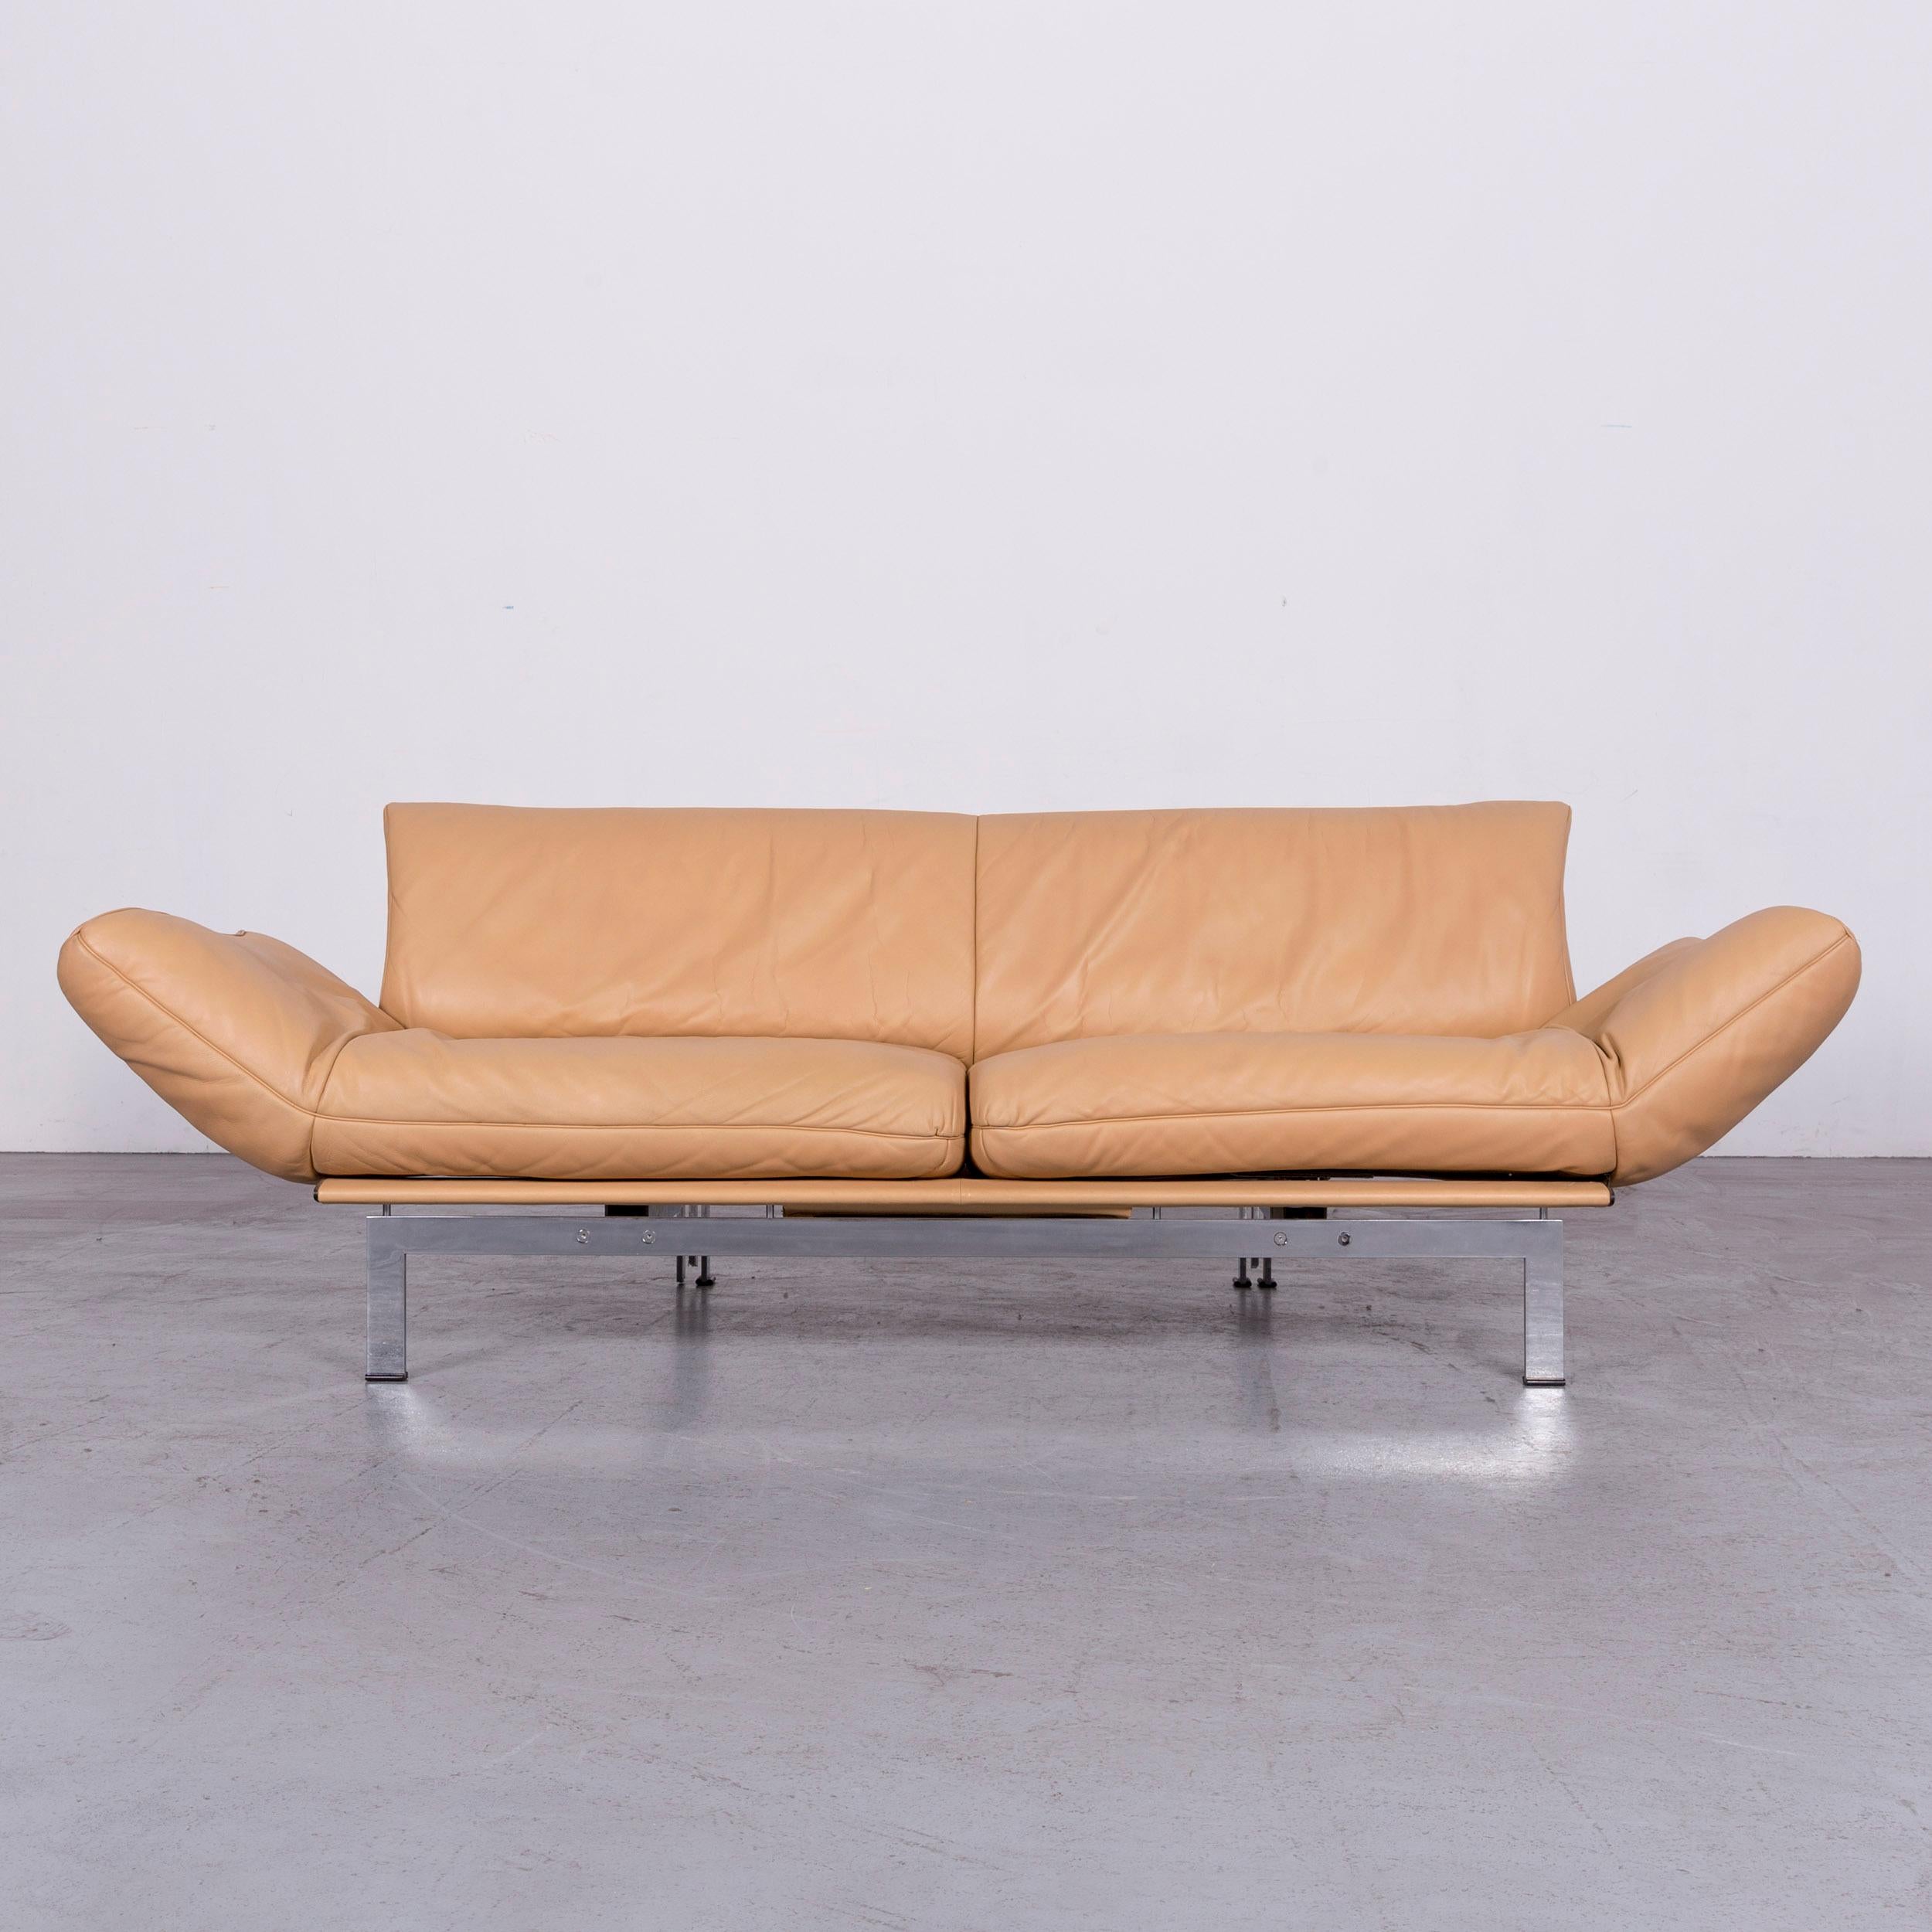 We bring to you a De Sede DS 140 designer leather sofa beige three-seat function modern.